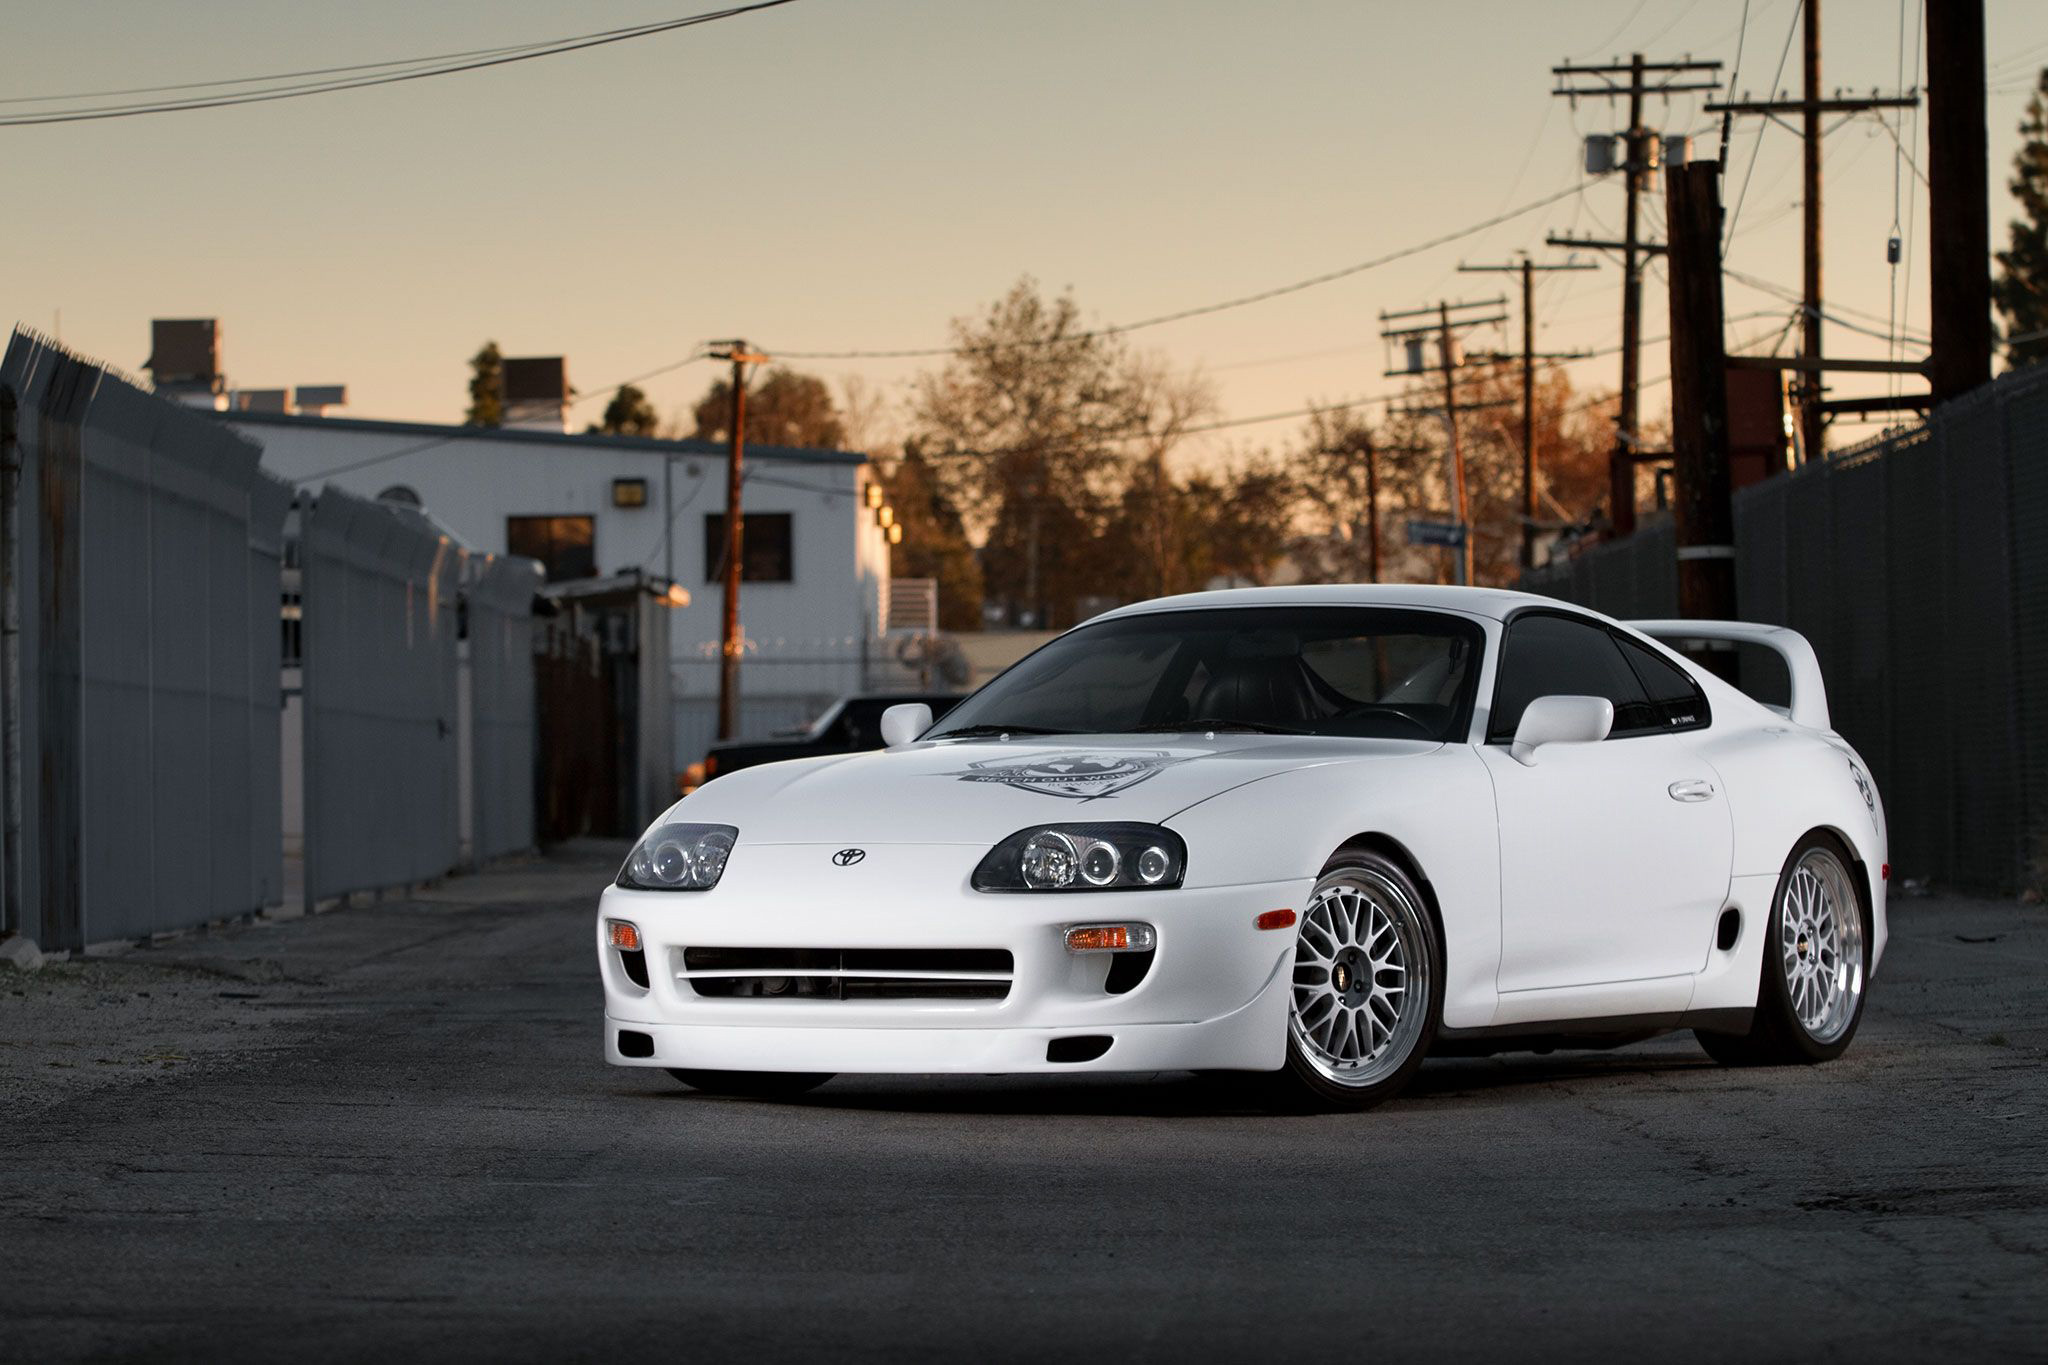 Image result for White supra fast and furious